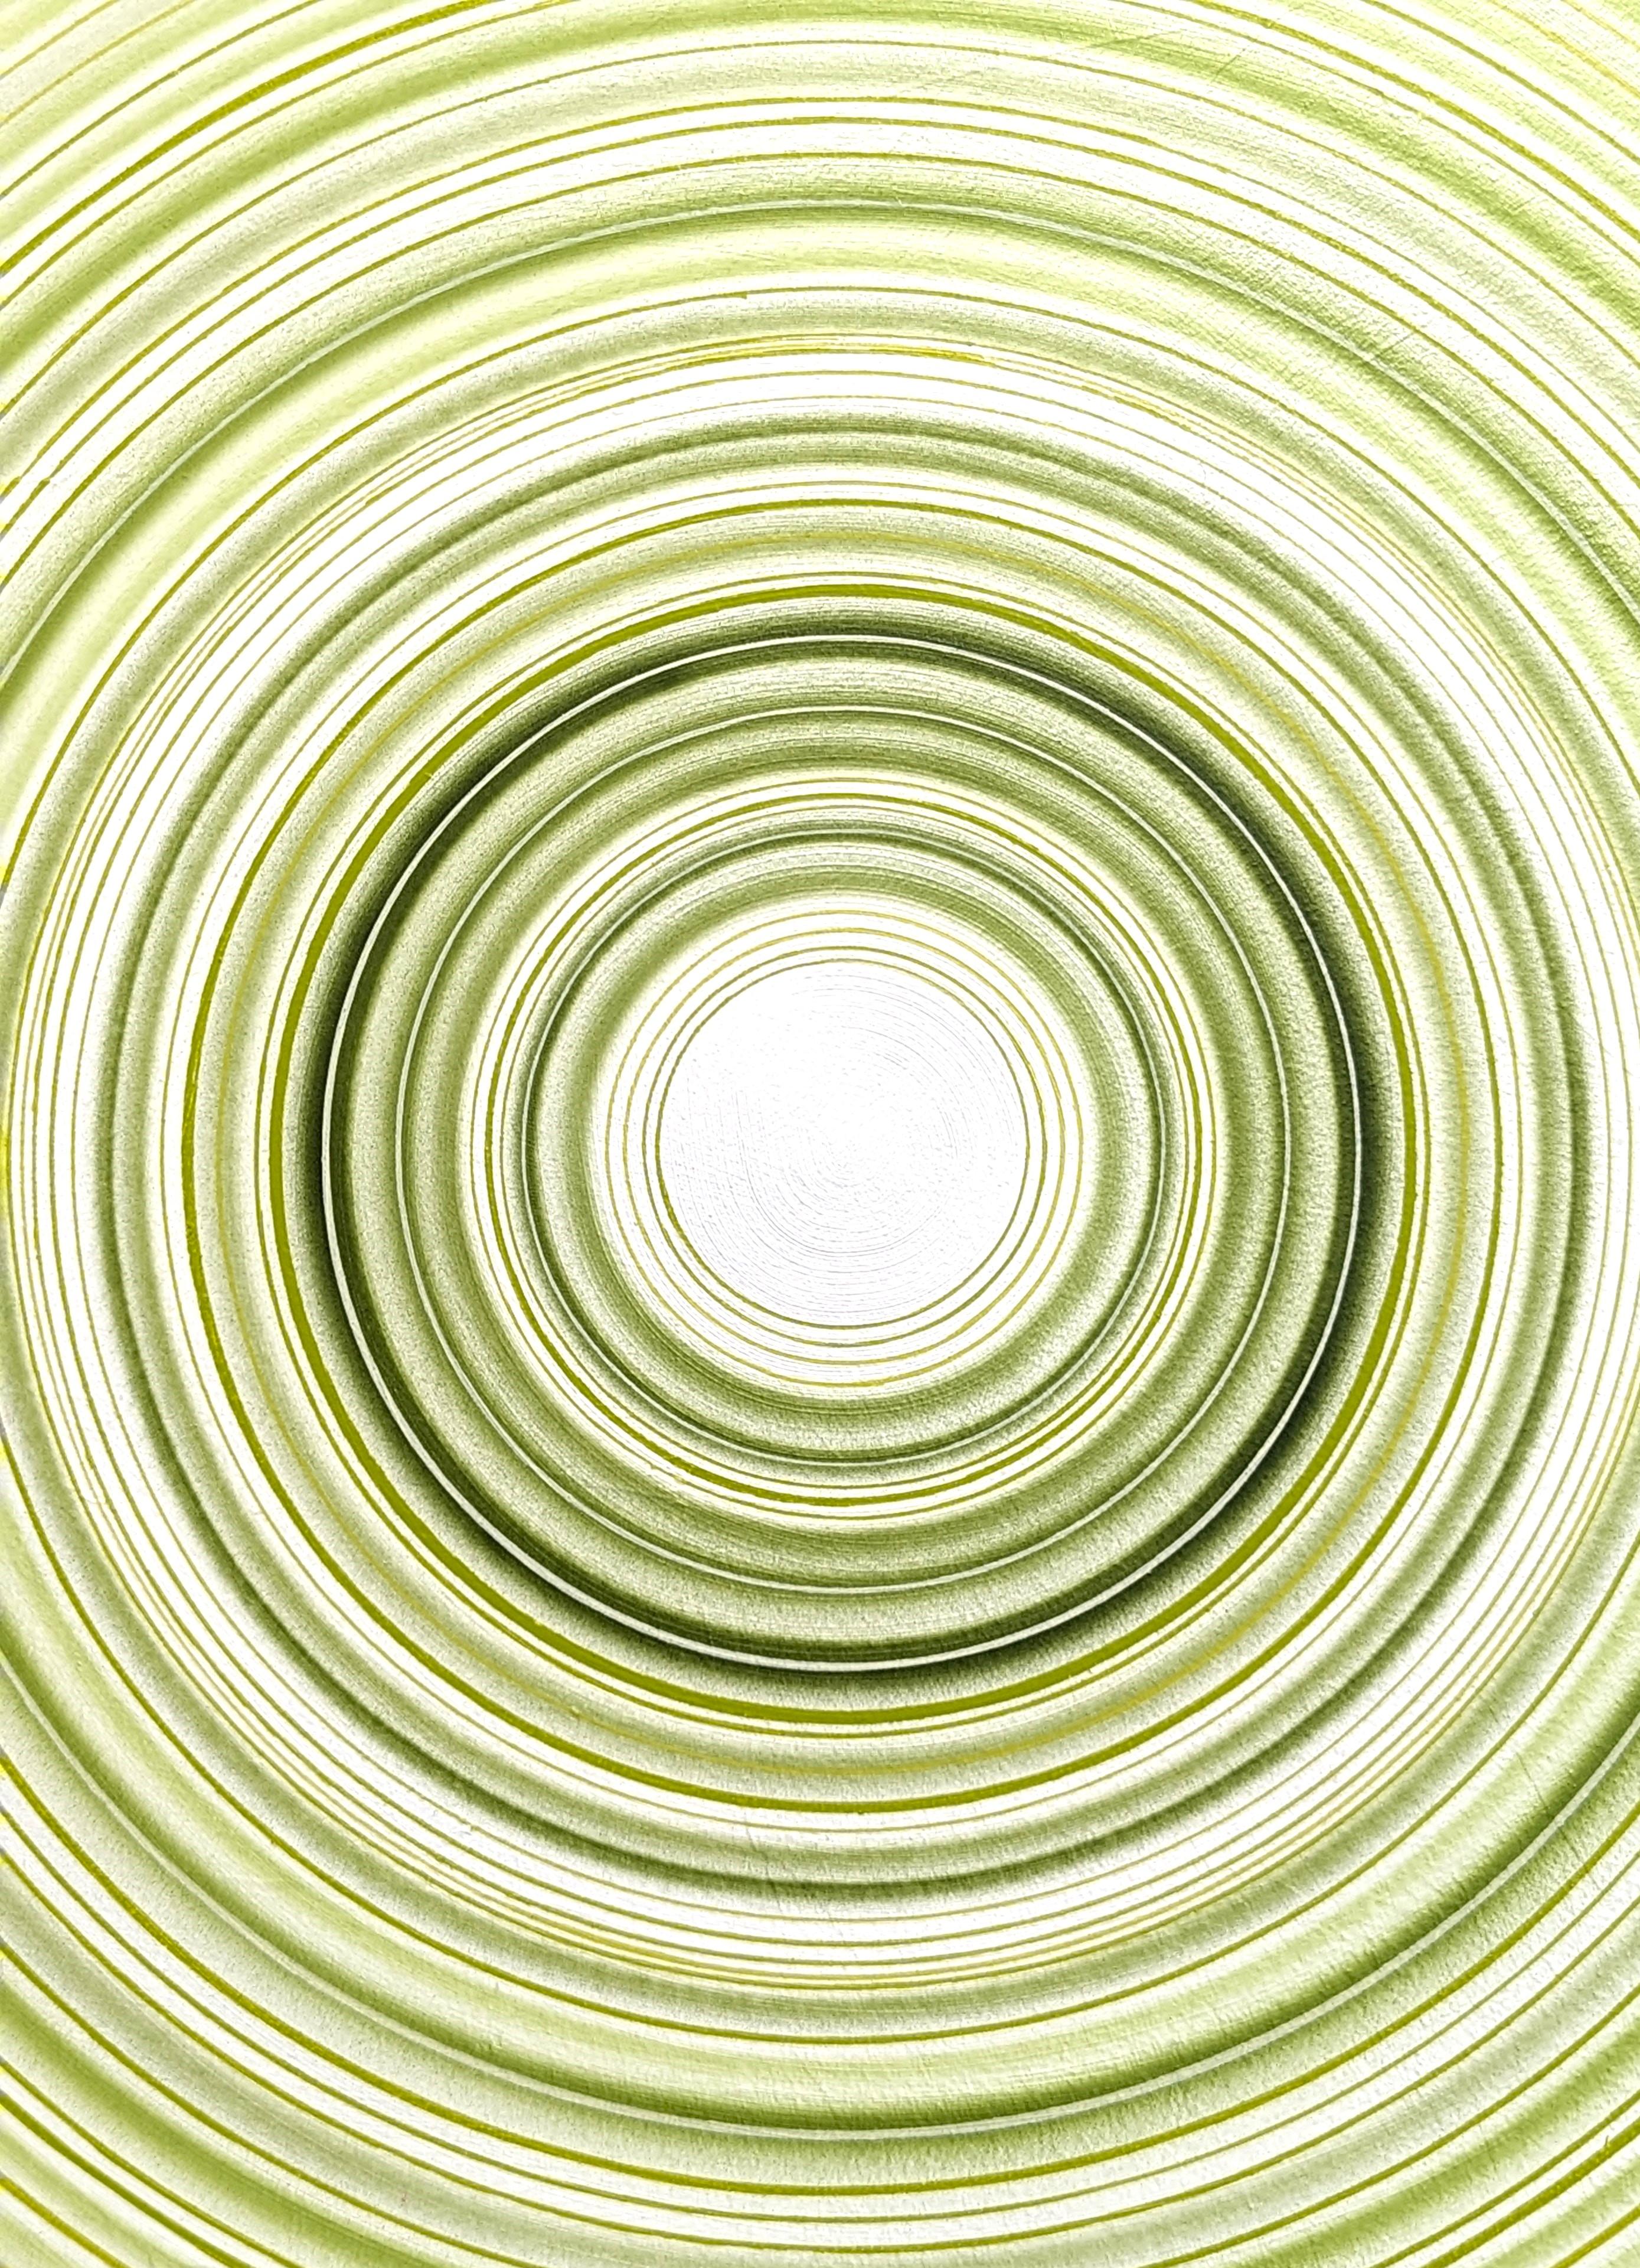 Green and white abstract contemporary circular painting by Houston, TX artist David Hardaker. Signed, titled, and dated by the artist on the reverse. 

Artist Statement: The work is a response to music.

The application of texture and the act of